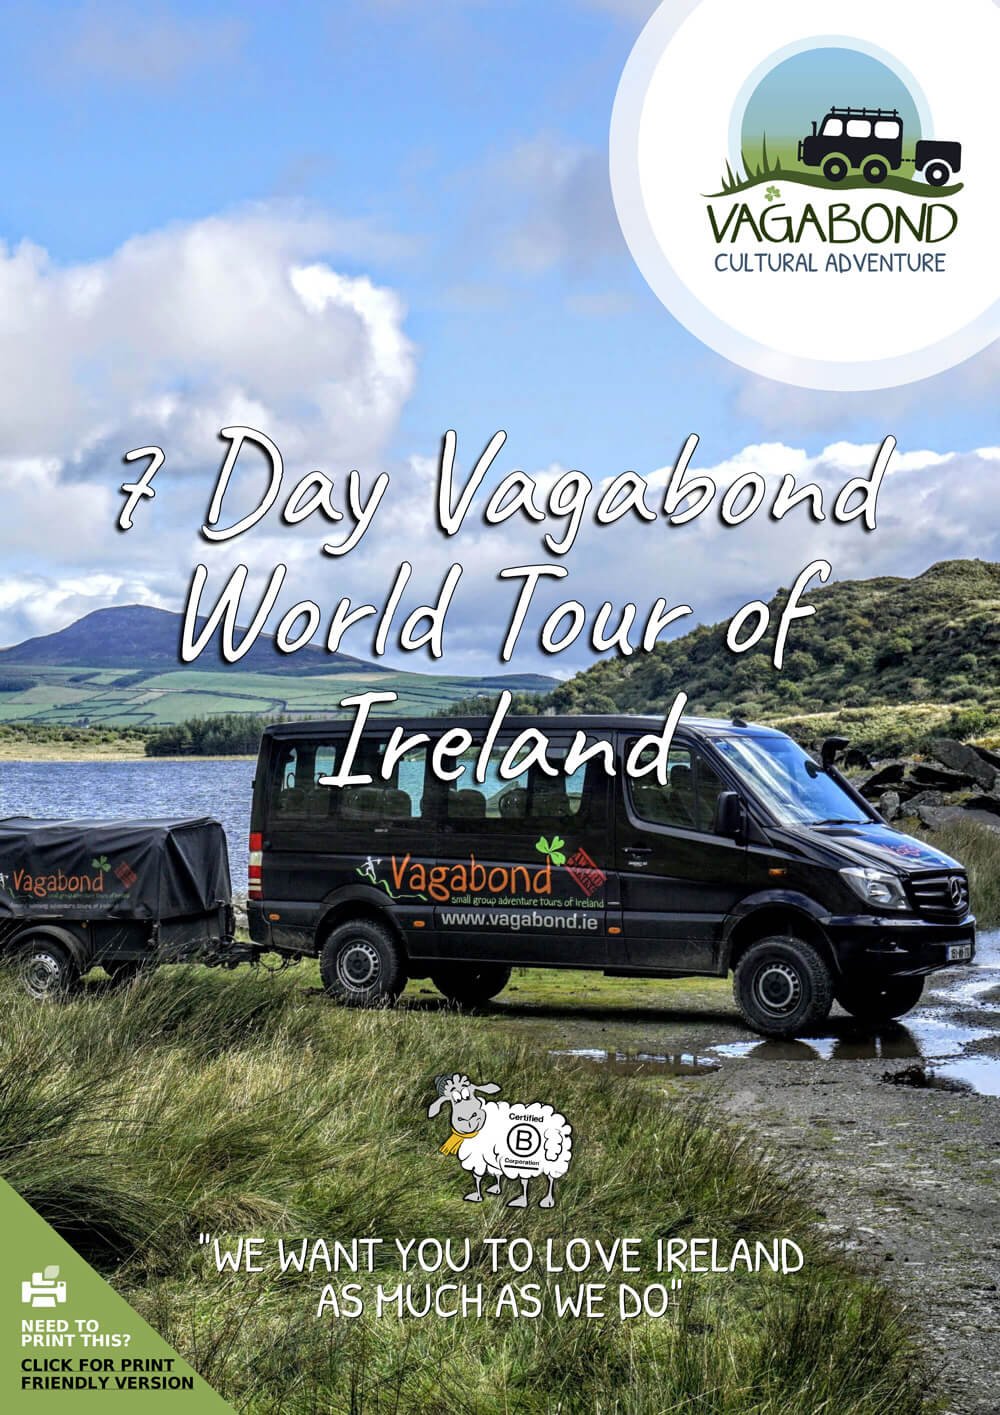 7 Day Vagabond World Tour of Ireland itinerary cover with picture of tour vehicle in Ireland